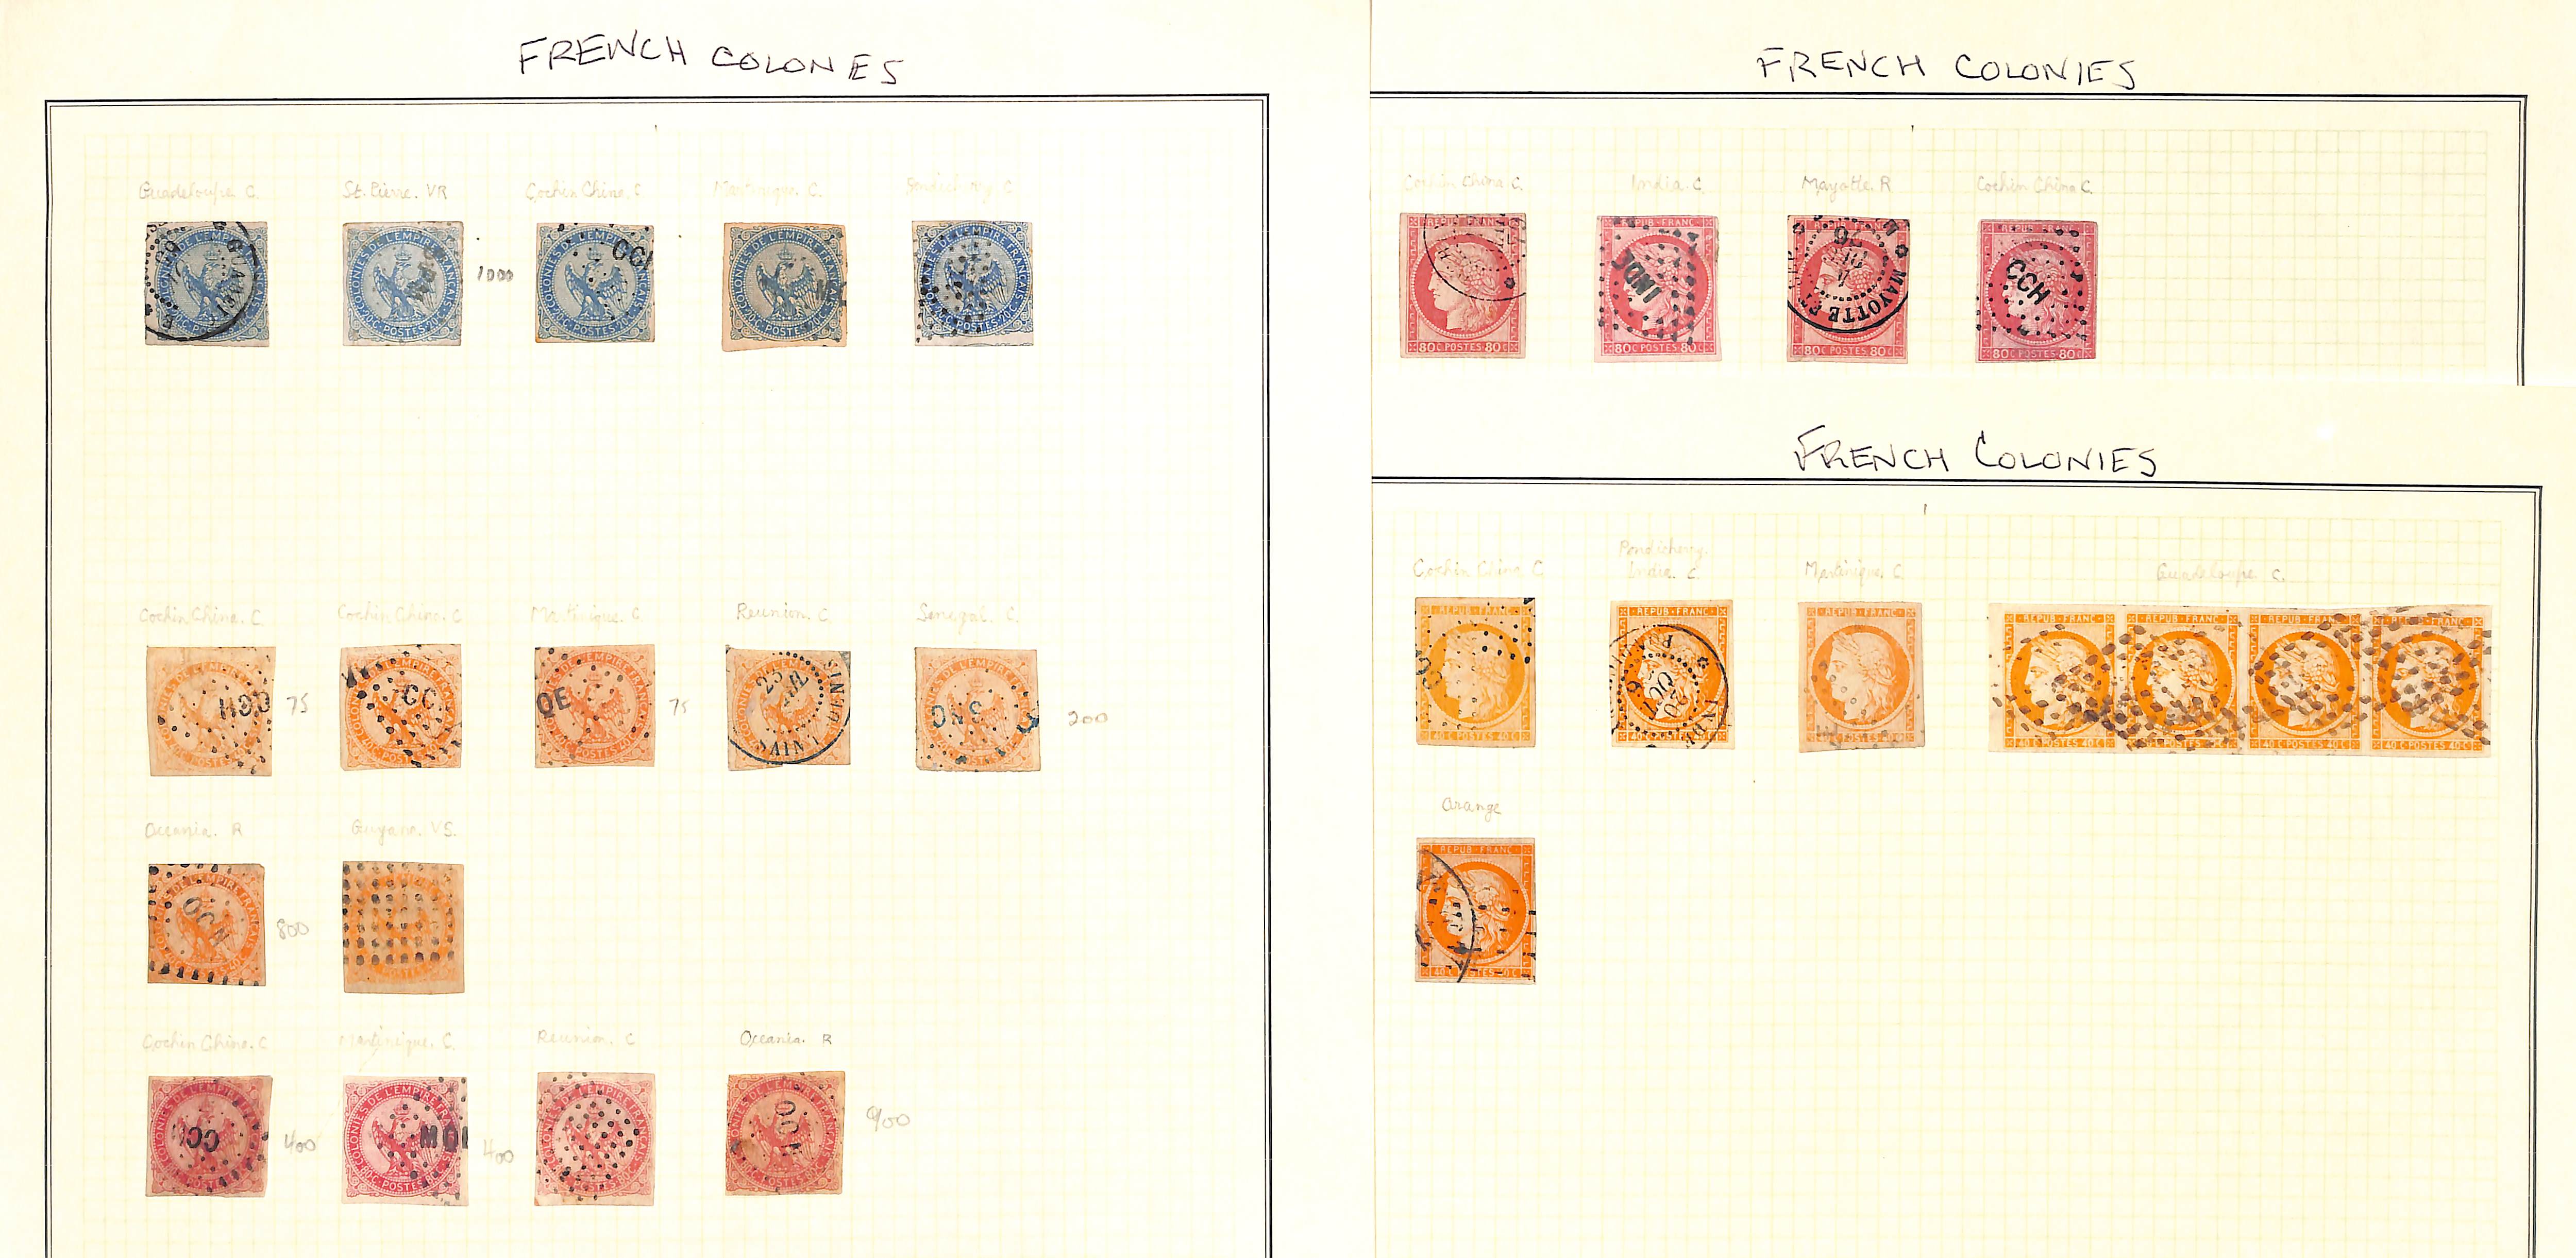 French Colonies. 1859-77 Used issues, collected for the cancellations, various lozenge and c.d.s - Image 3 of 7